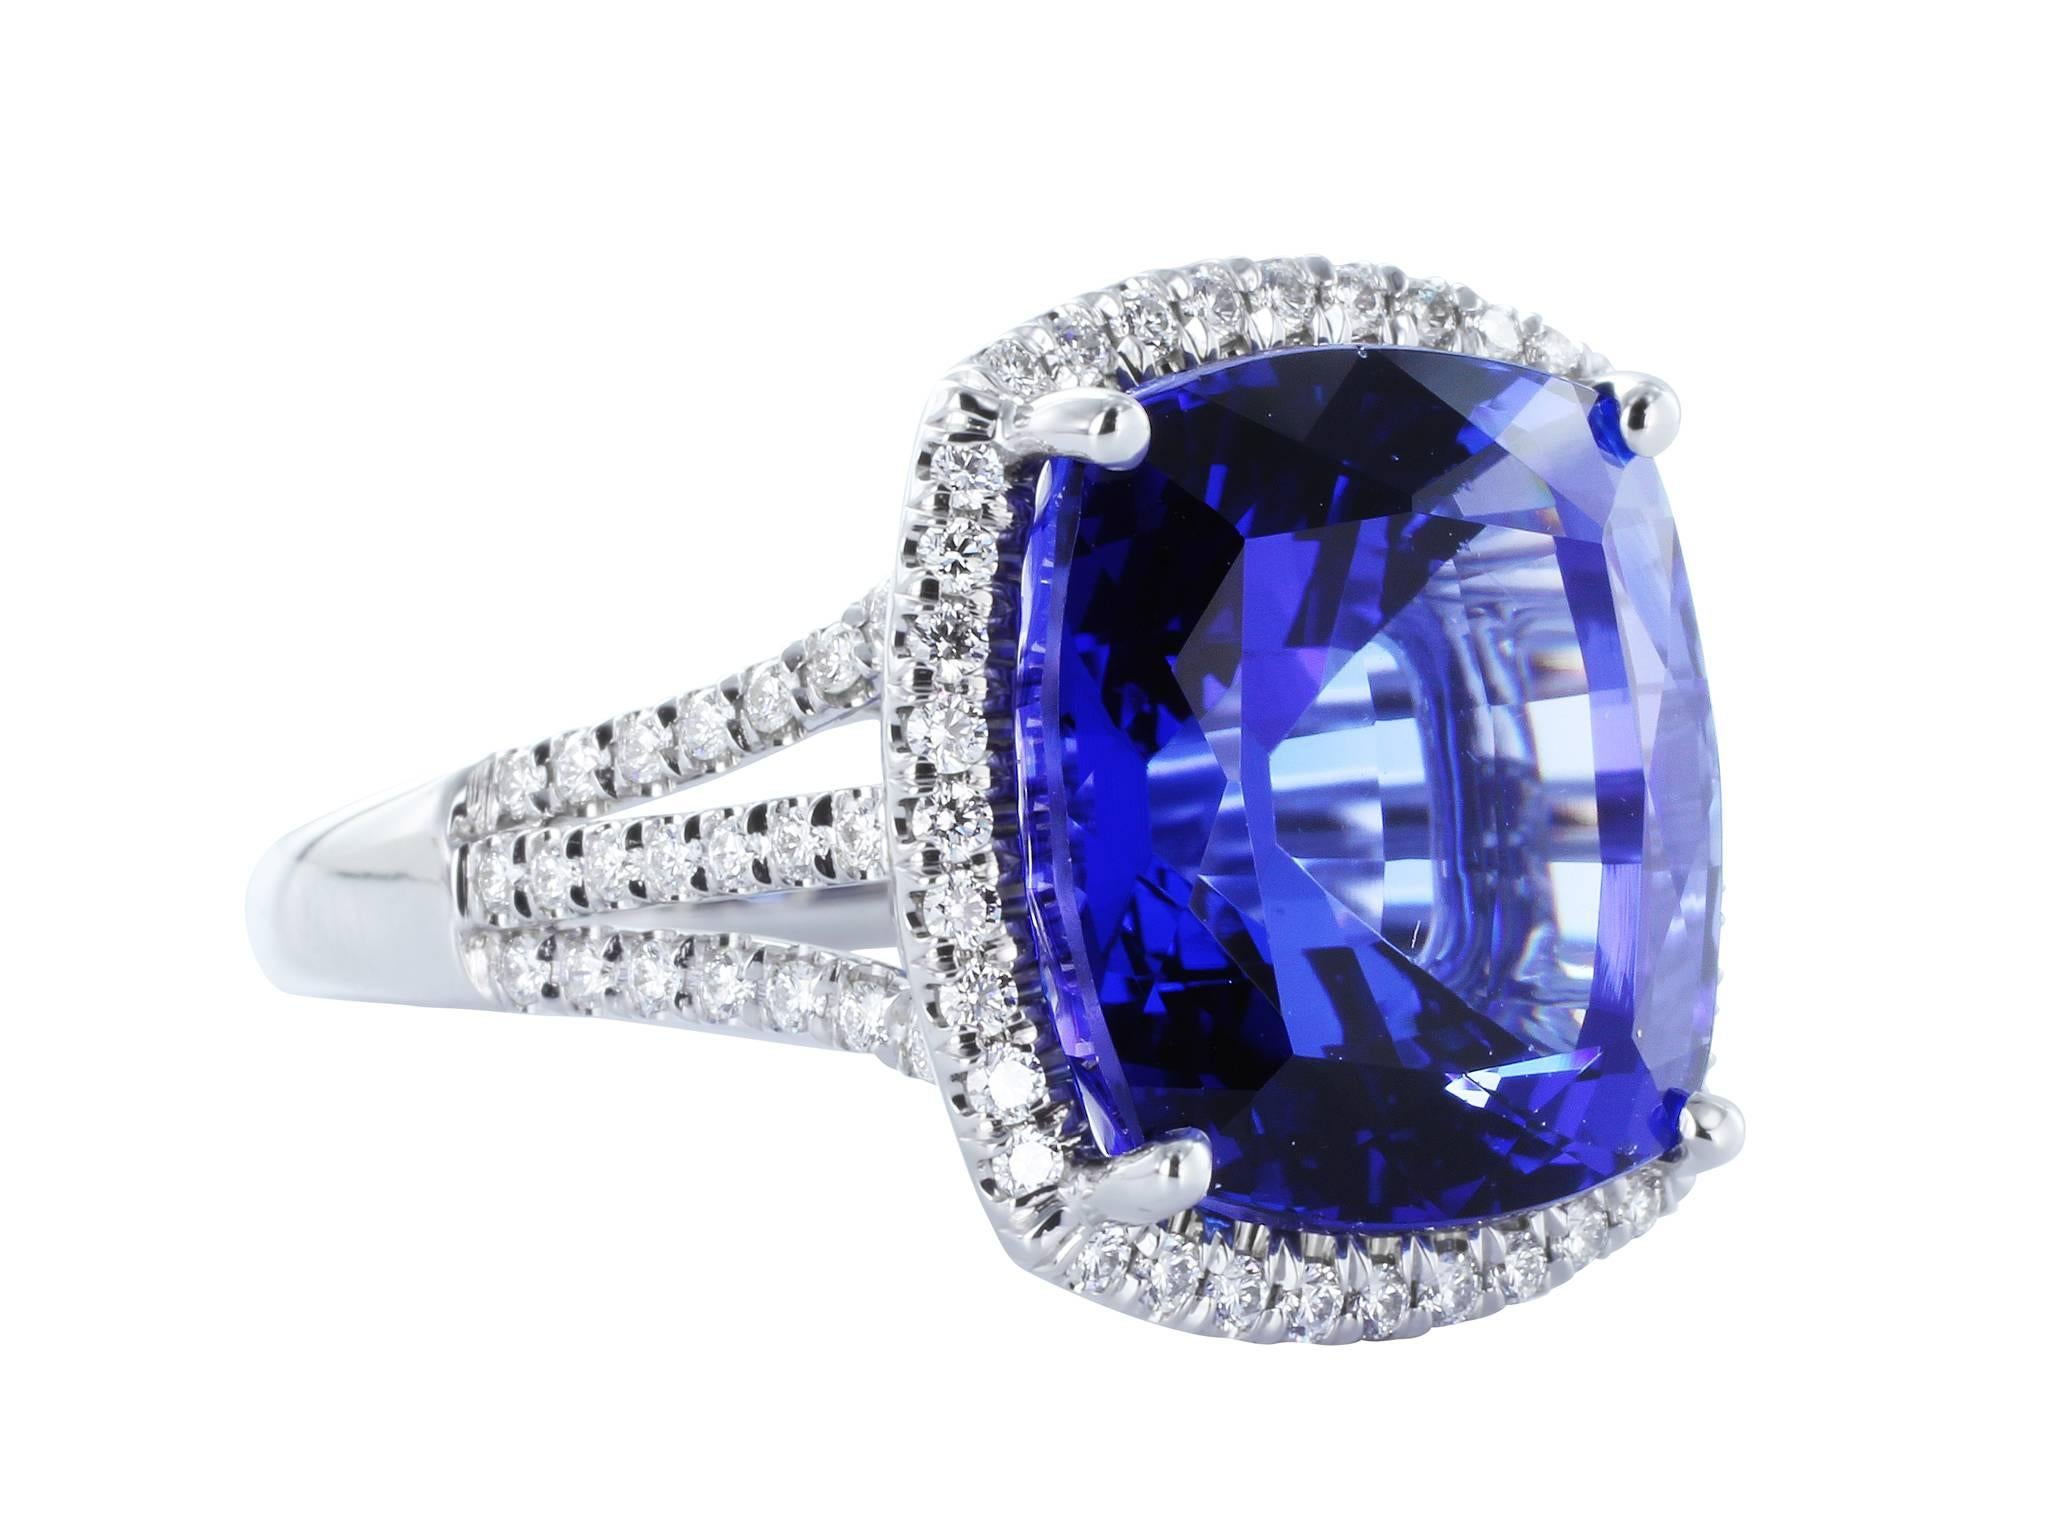 18 karat white gold custom made cluster ring consisting of 1 cushion cut Tanzanite weighing 16.17 carats. The center stone is accented by a halo of full cut diamonds, a tri split shank set with full cut diamonds and 2 bezel set full cut diamonds one